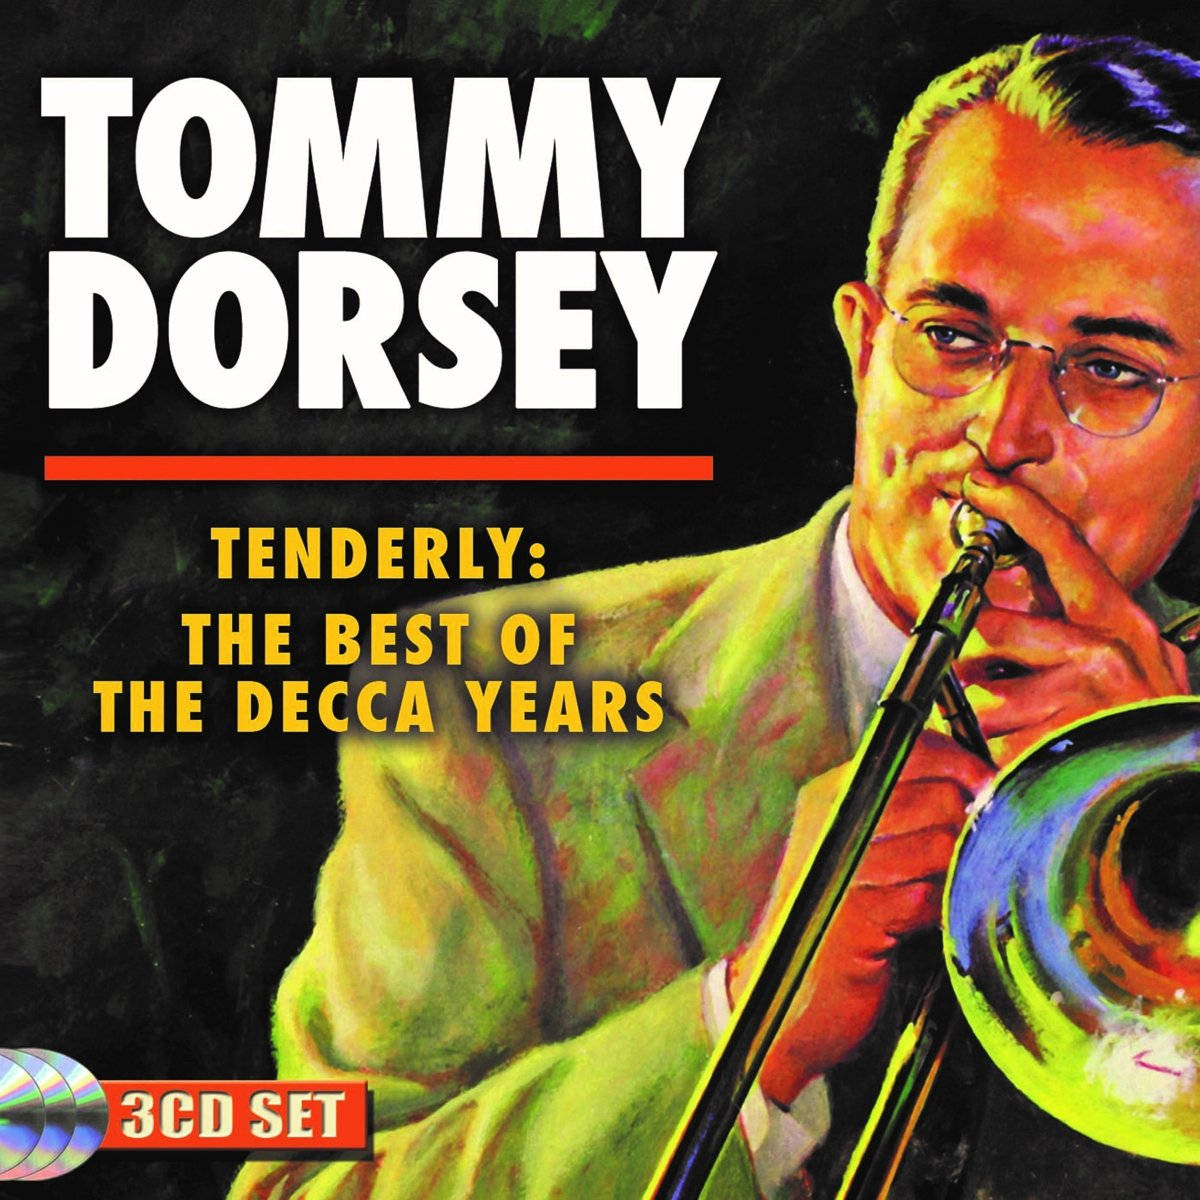 Tommydorsey Tenderly Best Of Decca Years Would Be Translated To 